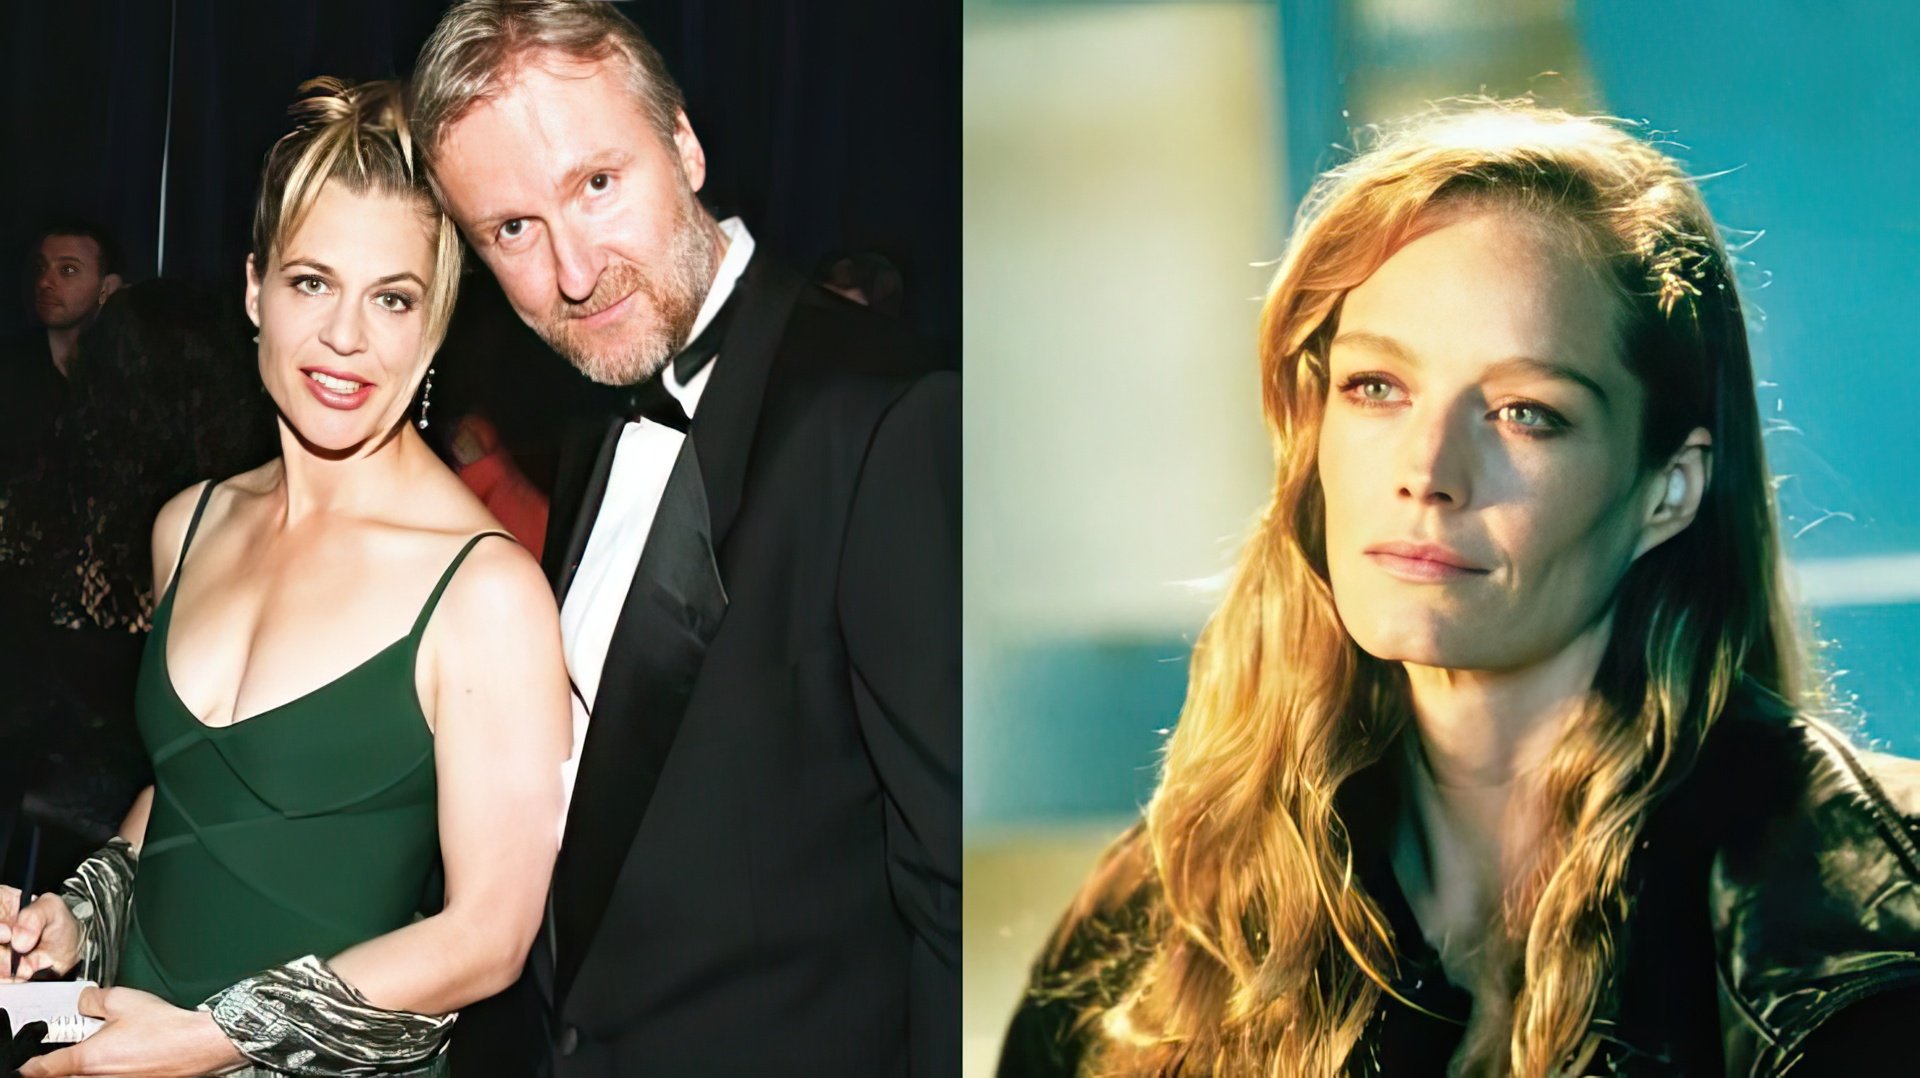 James Cameron left Linda for Suzy Amis (on the right)